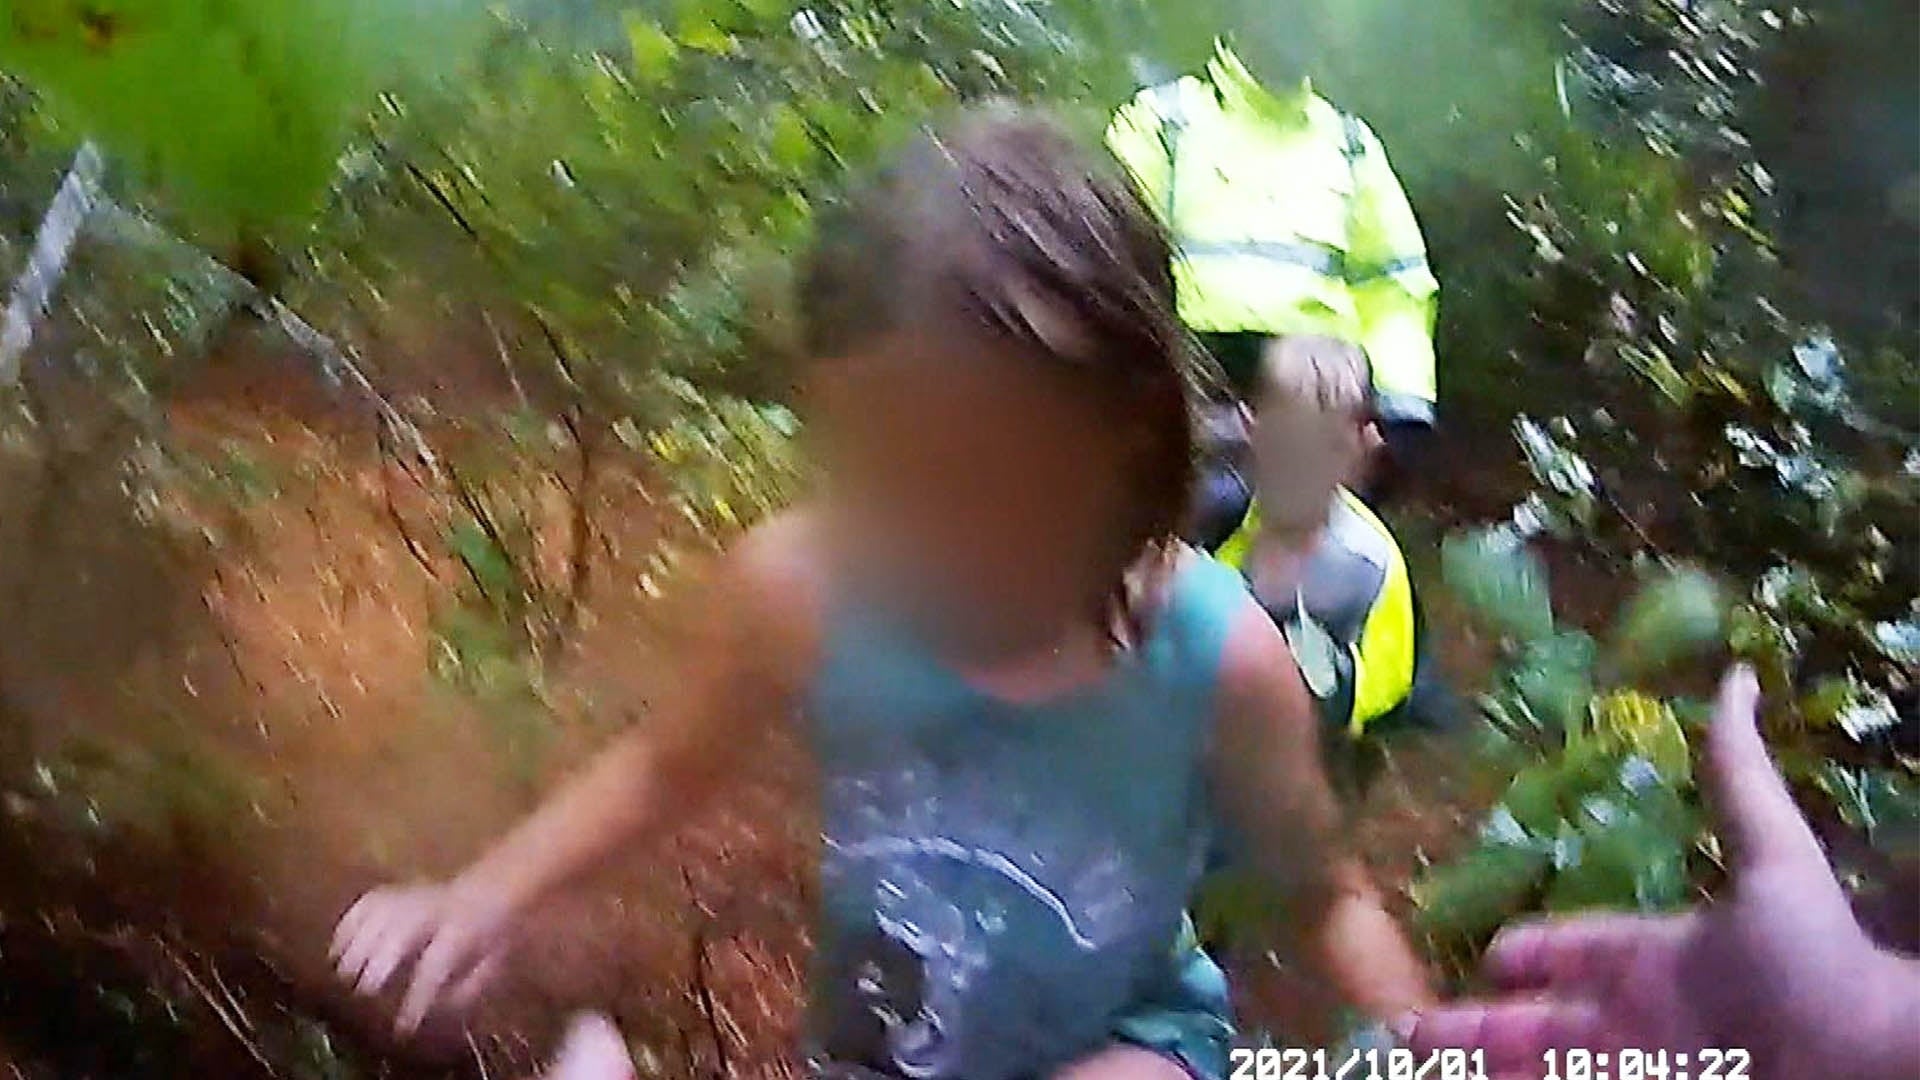 ‘I got em’: Moment Texas police rescue children lost in the woods